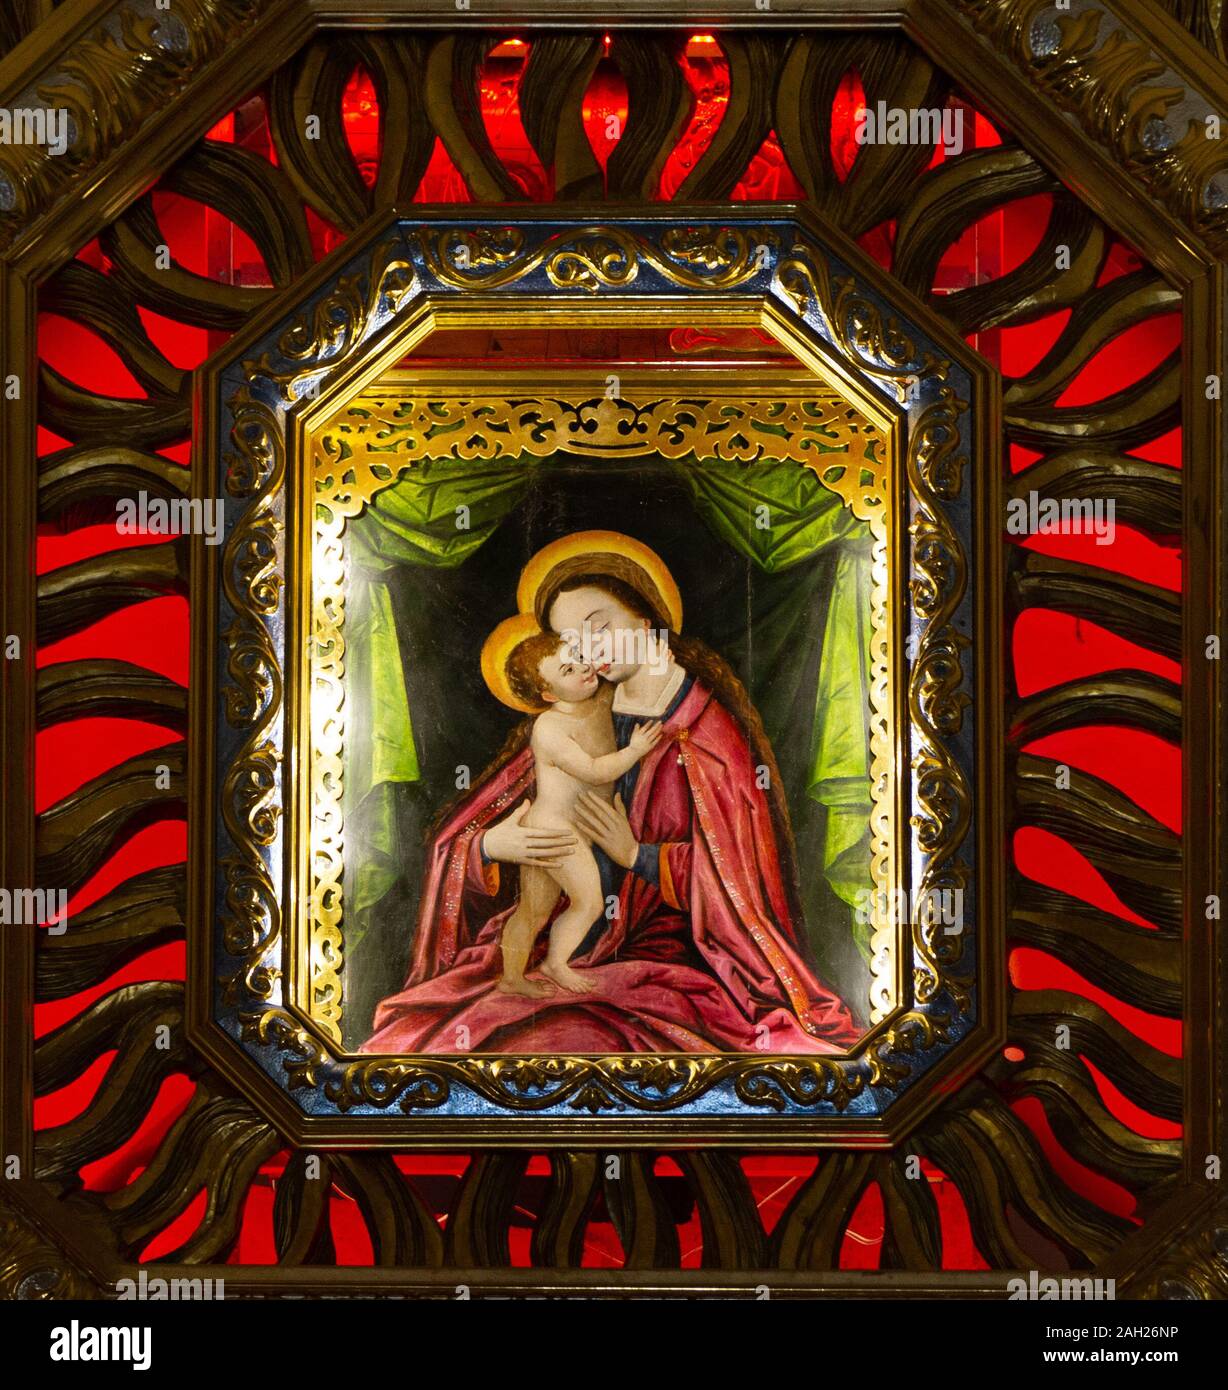 The painting of the Madonna in the Sanctuary of Our Lady of Tylicz. Stock Photo